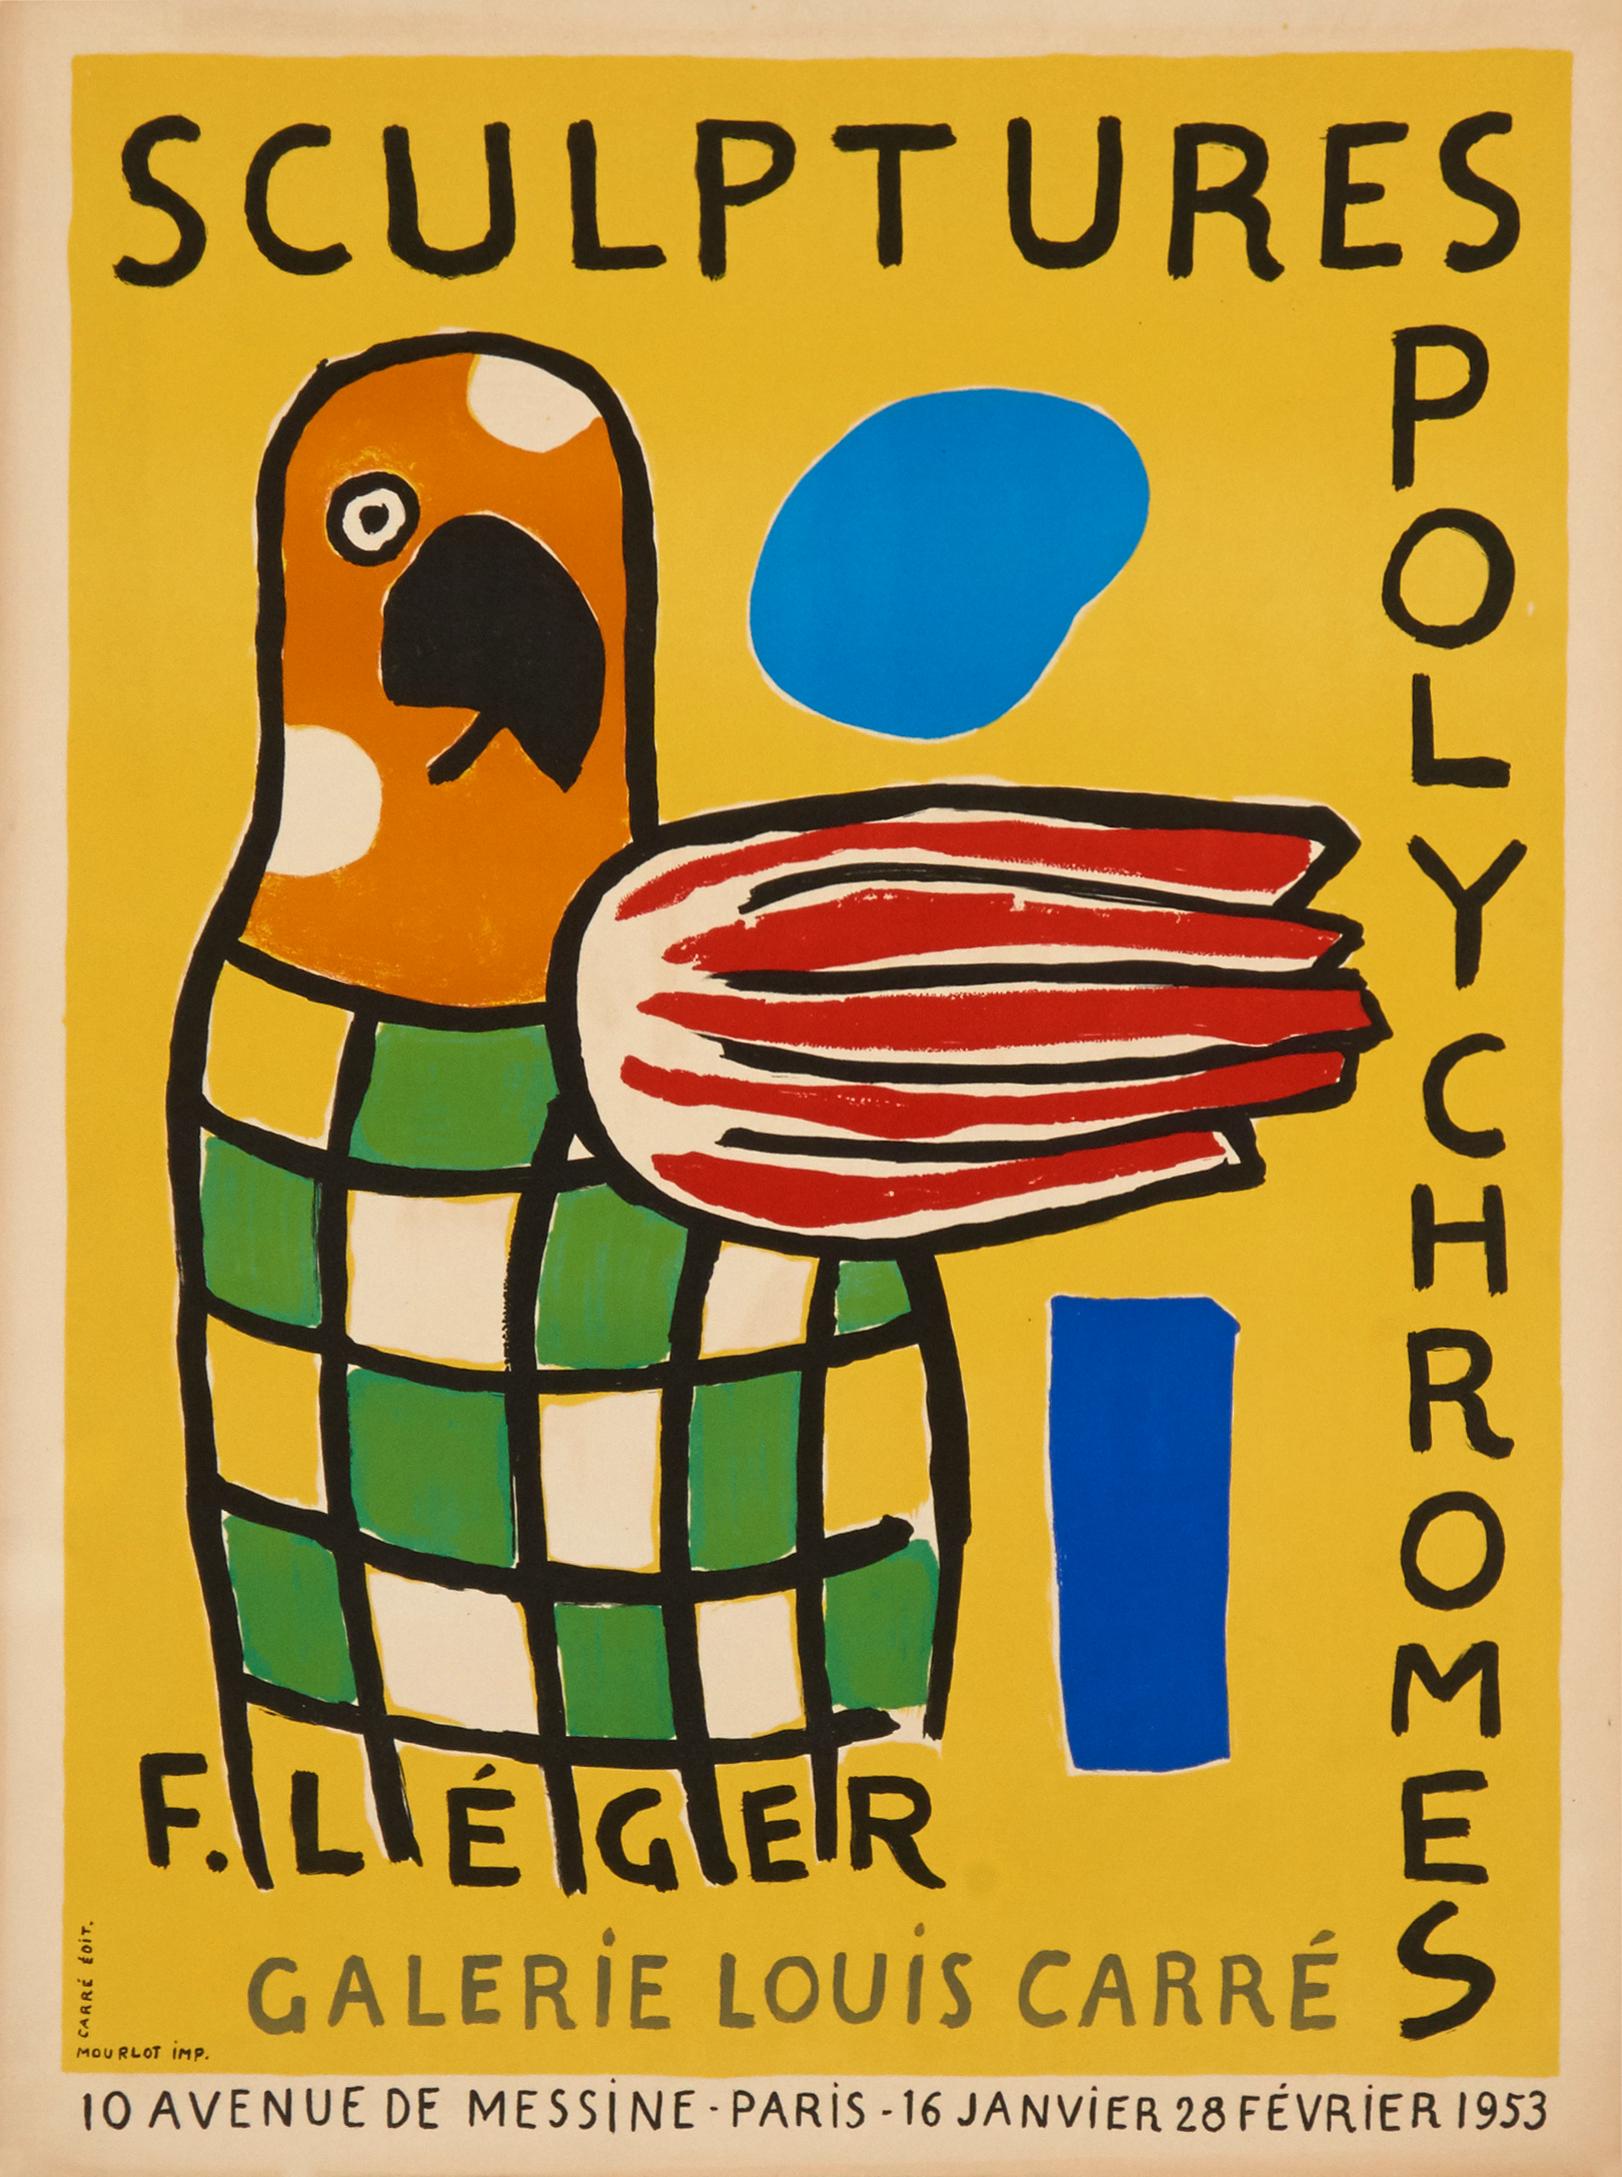 Sculptures Polychromes by Fernand Leger - modern lithograph (abstract parrot)